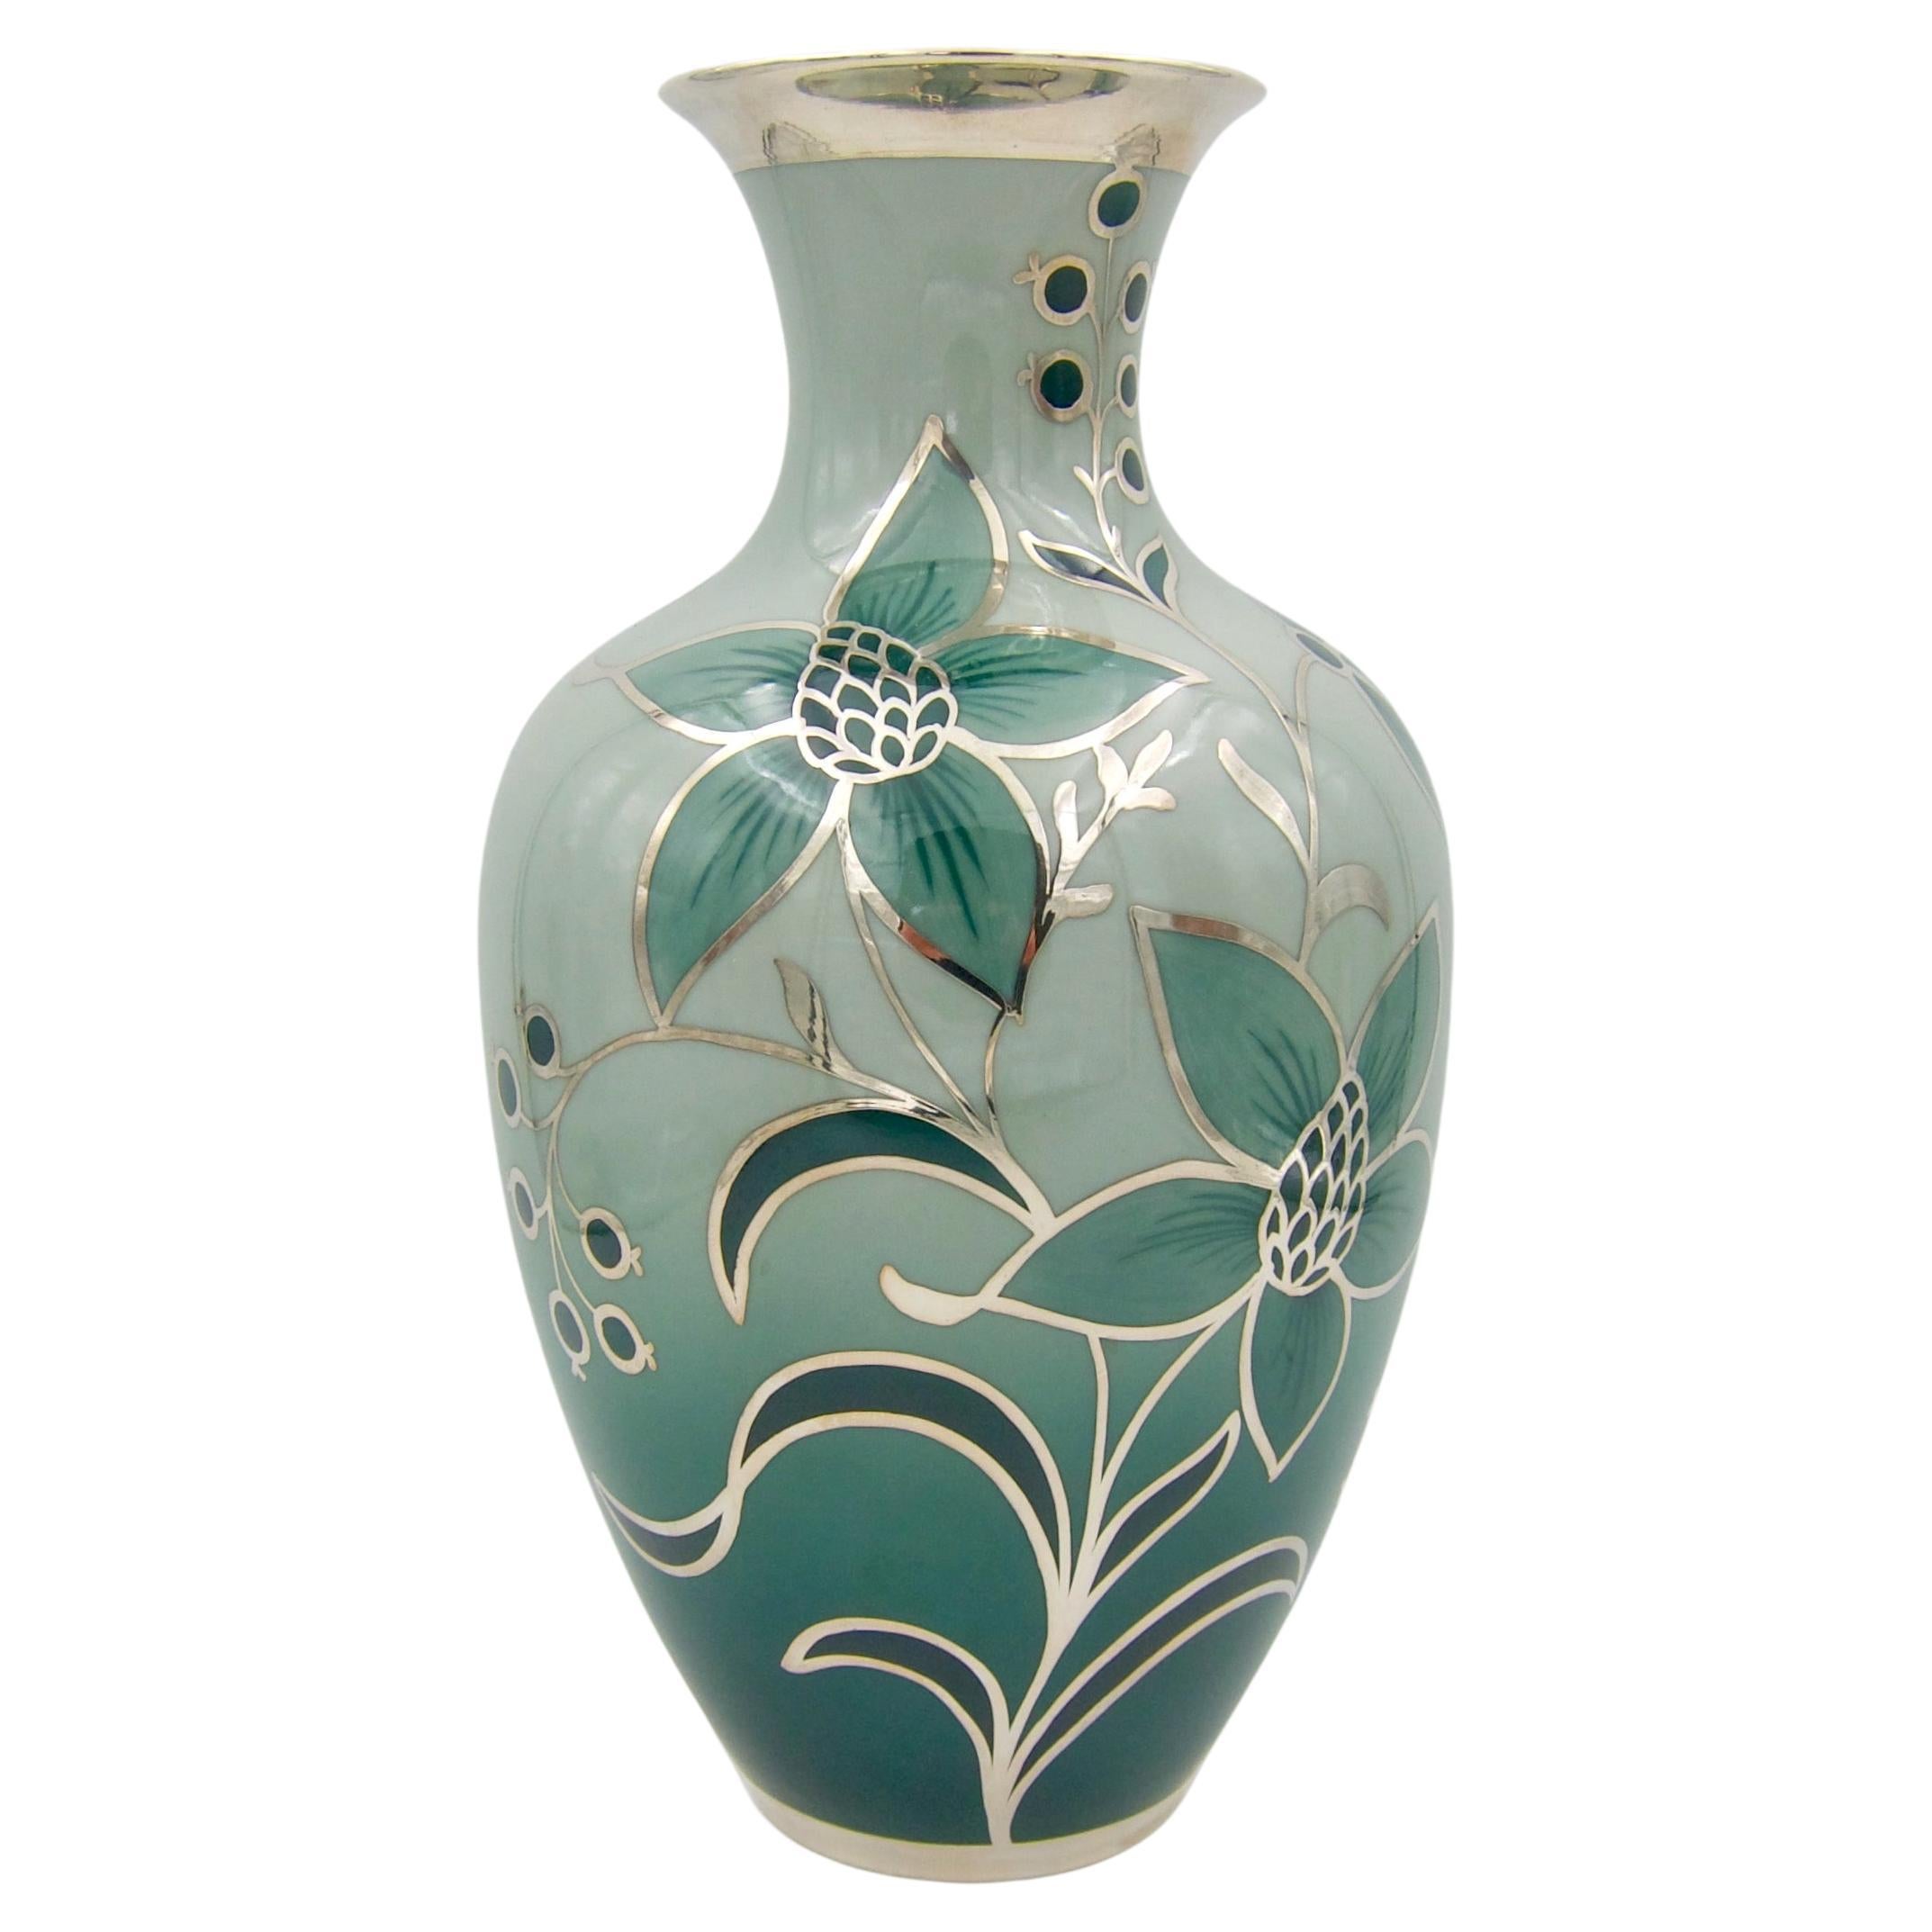 A large green porcelain vase with silver overlay by Friedrich Wilhelm Spahr for Edelstein Porcelain. The vintage vase in the Art Deco style was made in Germany during first half 20th century. The porcelain body is glazed inside and out in shades of